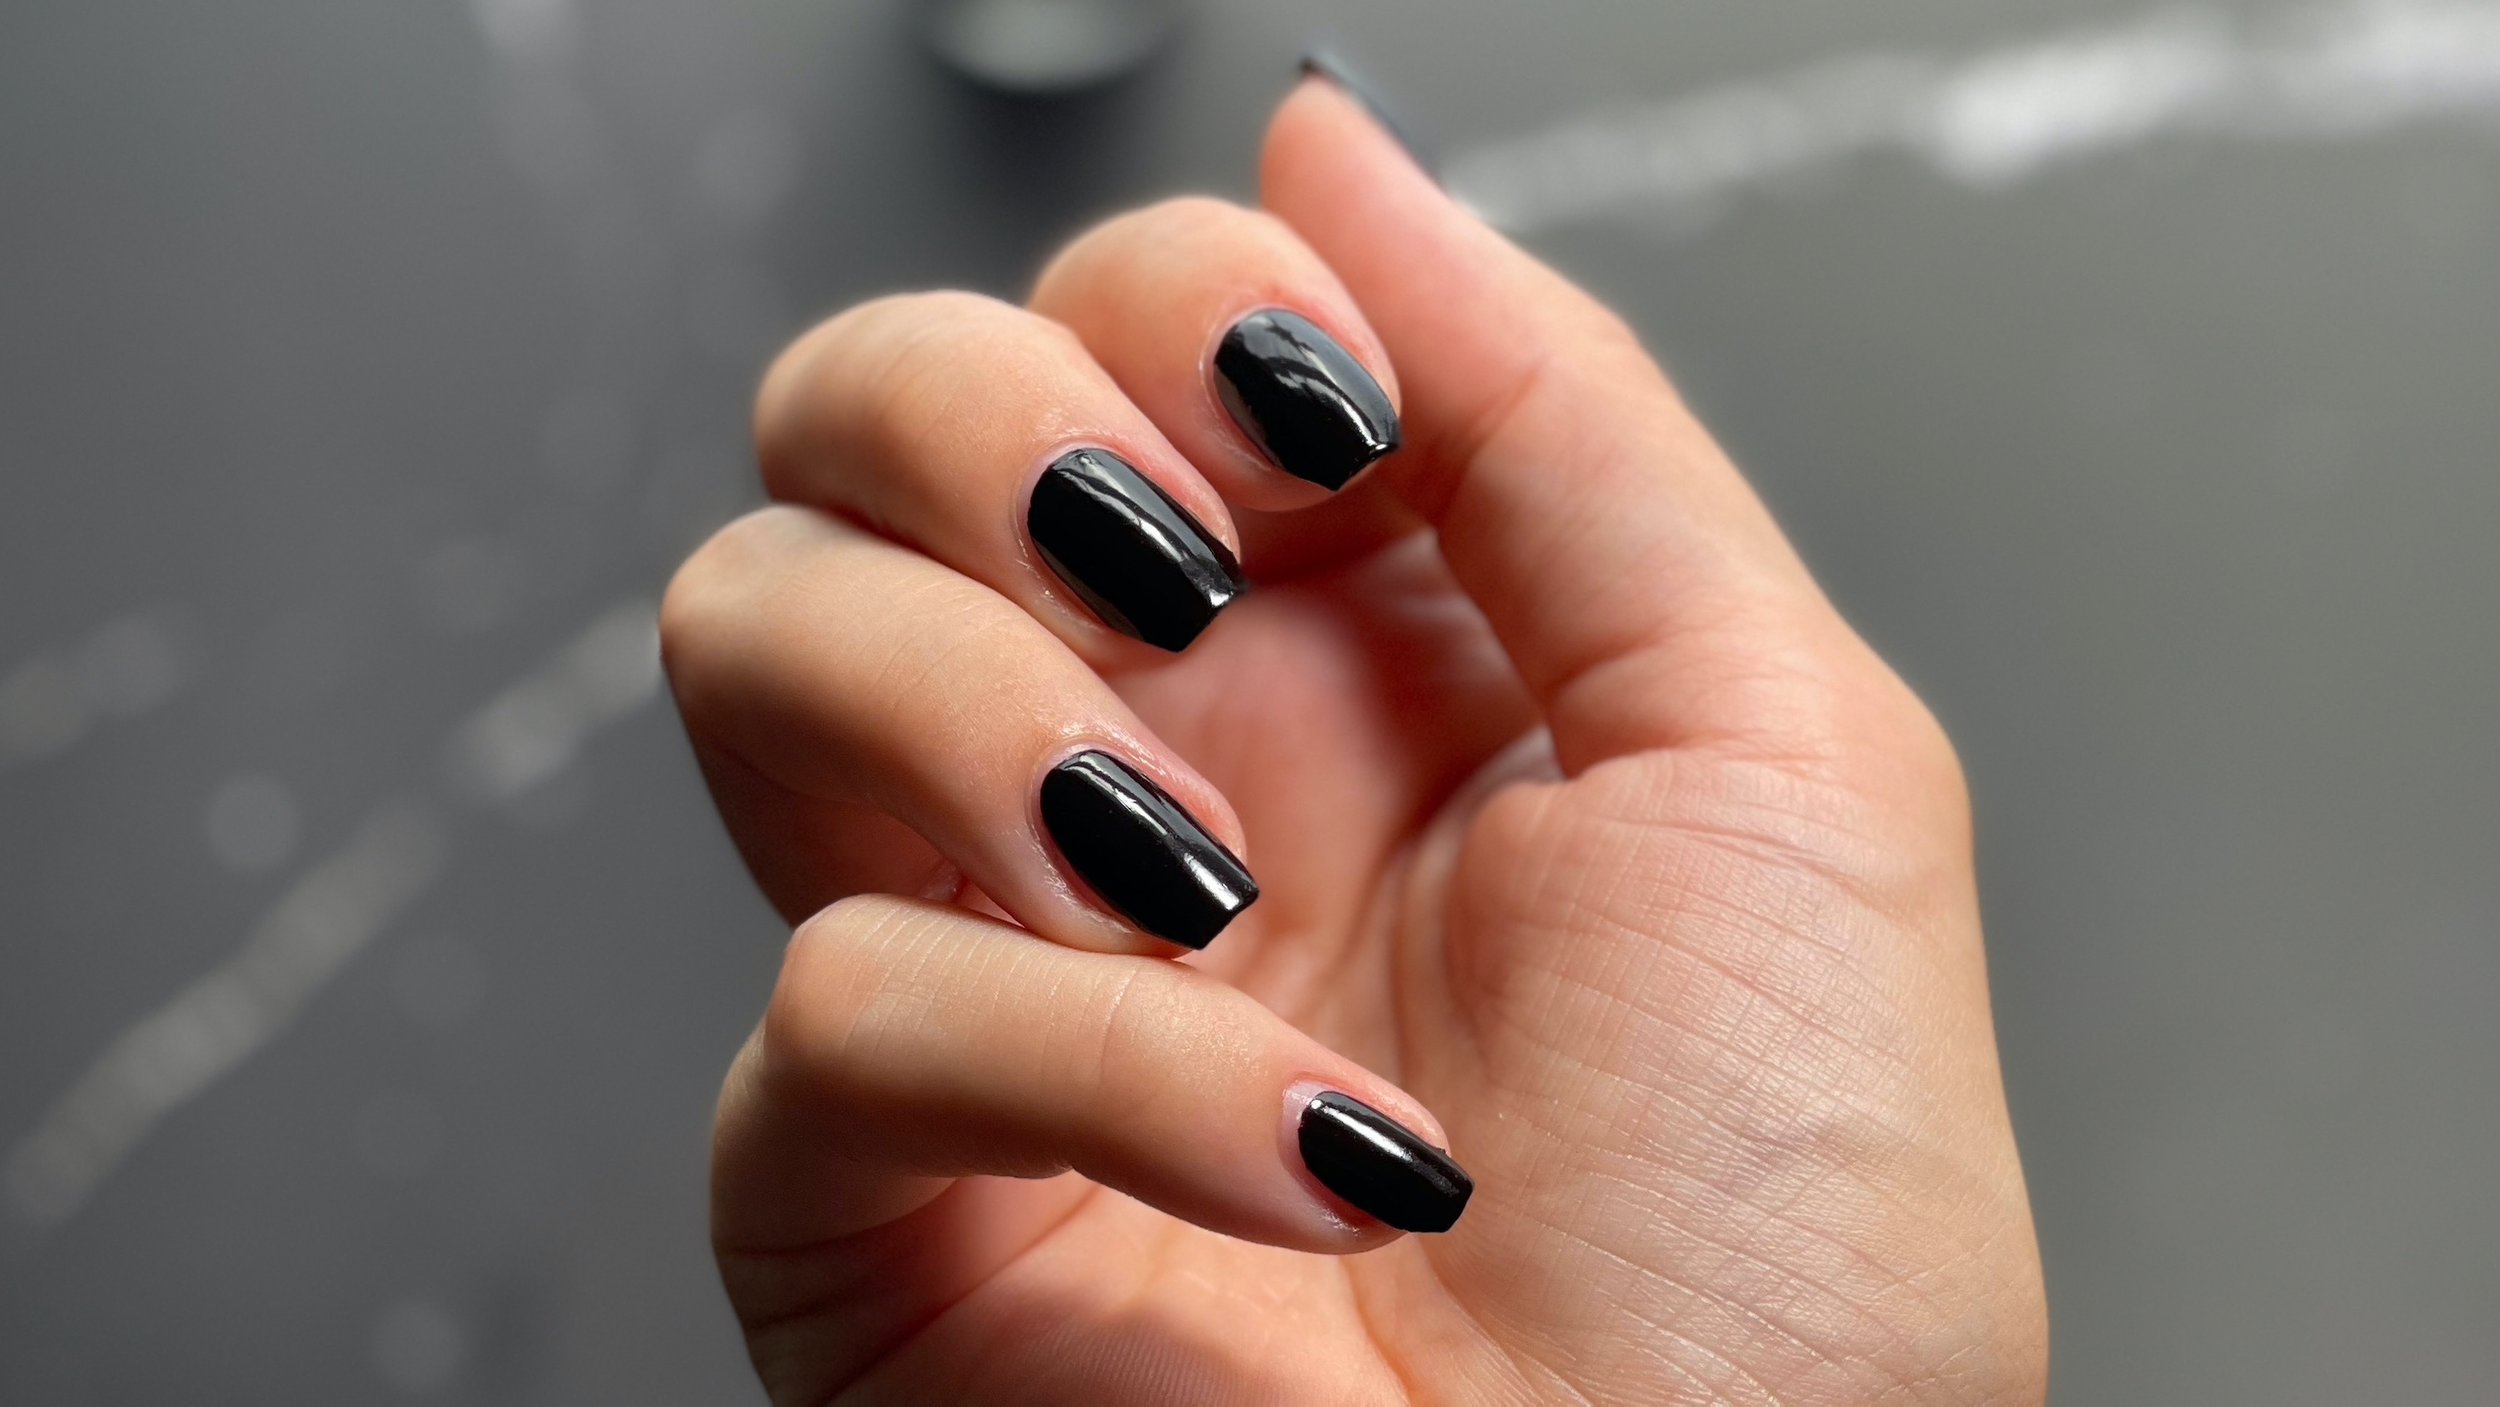 OPI Nail Lacquer in "Lincoln Park at Midnight" - wide 6